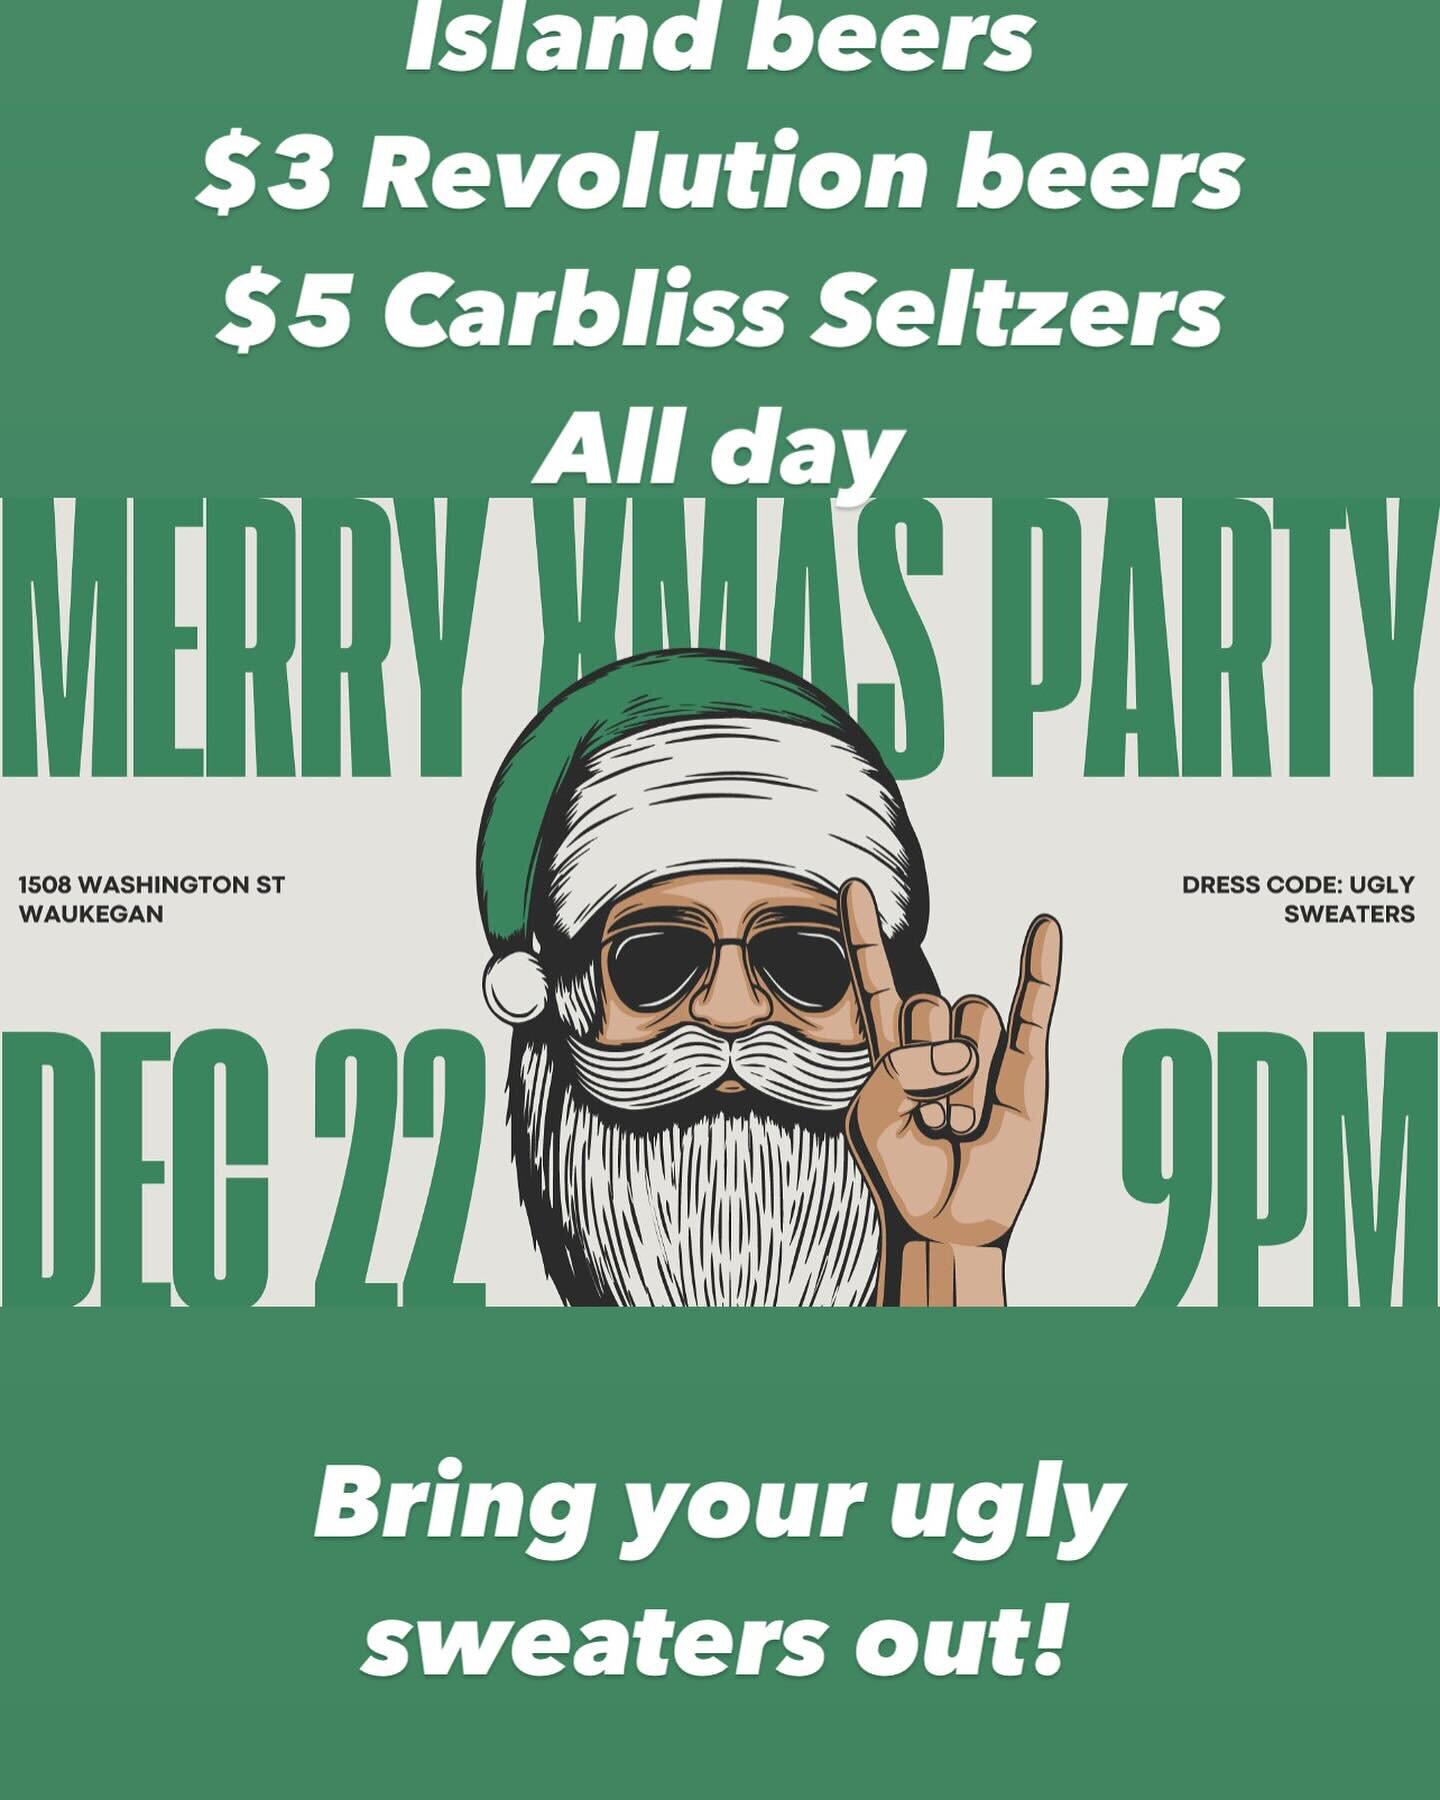 This Friday come out and hang with us at Maple. $3 Goose Island Beers, $3 Revolution, $5 Carbliss seltzers until we run out! 
Bring your ugly sweaters and enjoy some deals to start the holiday weekend!! #maplewkgn #waukeganbars #waukeganrestaurants #